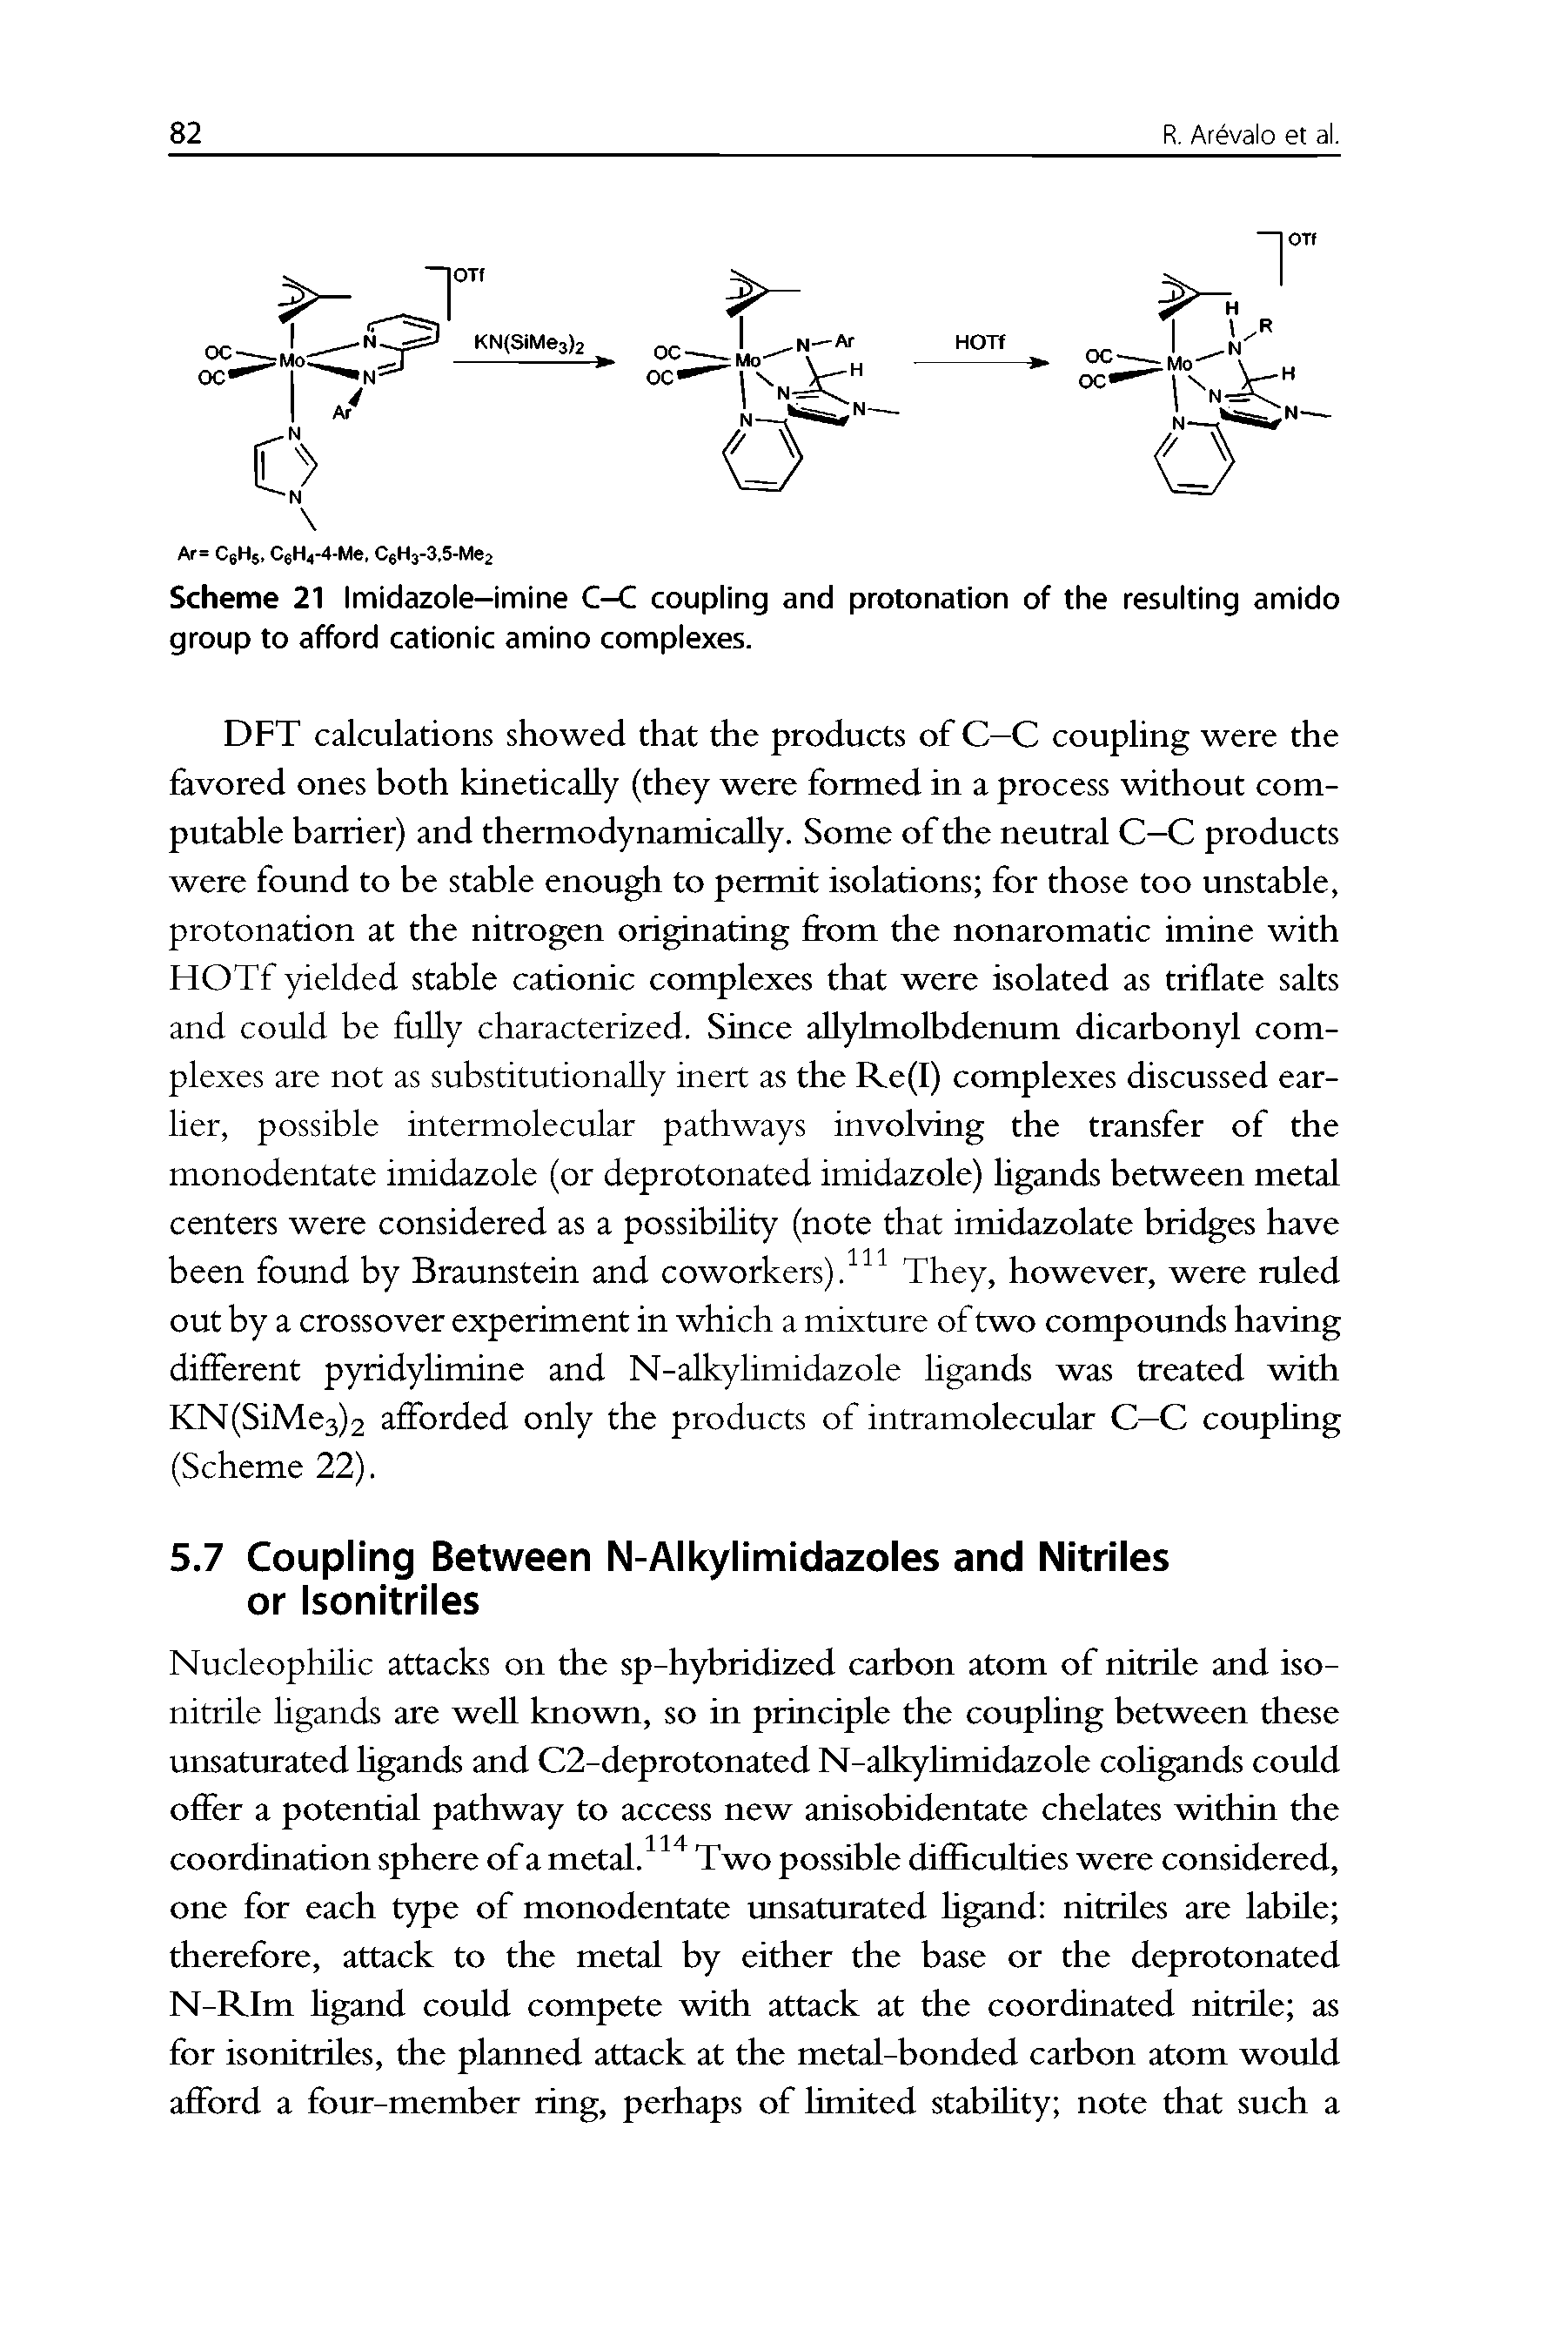 Scheme 21 Imidazole-imine C-C coupling and protonation of the resulting amido group to afford cationic amino complexes.